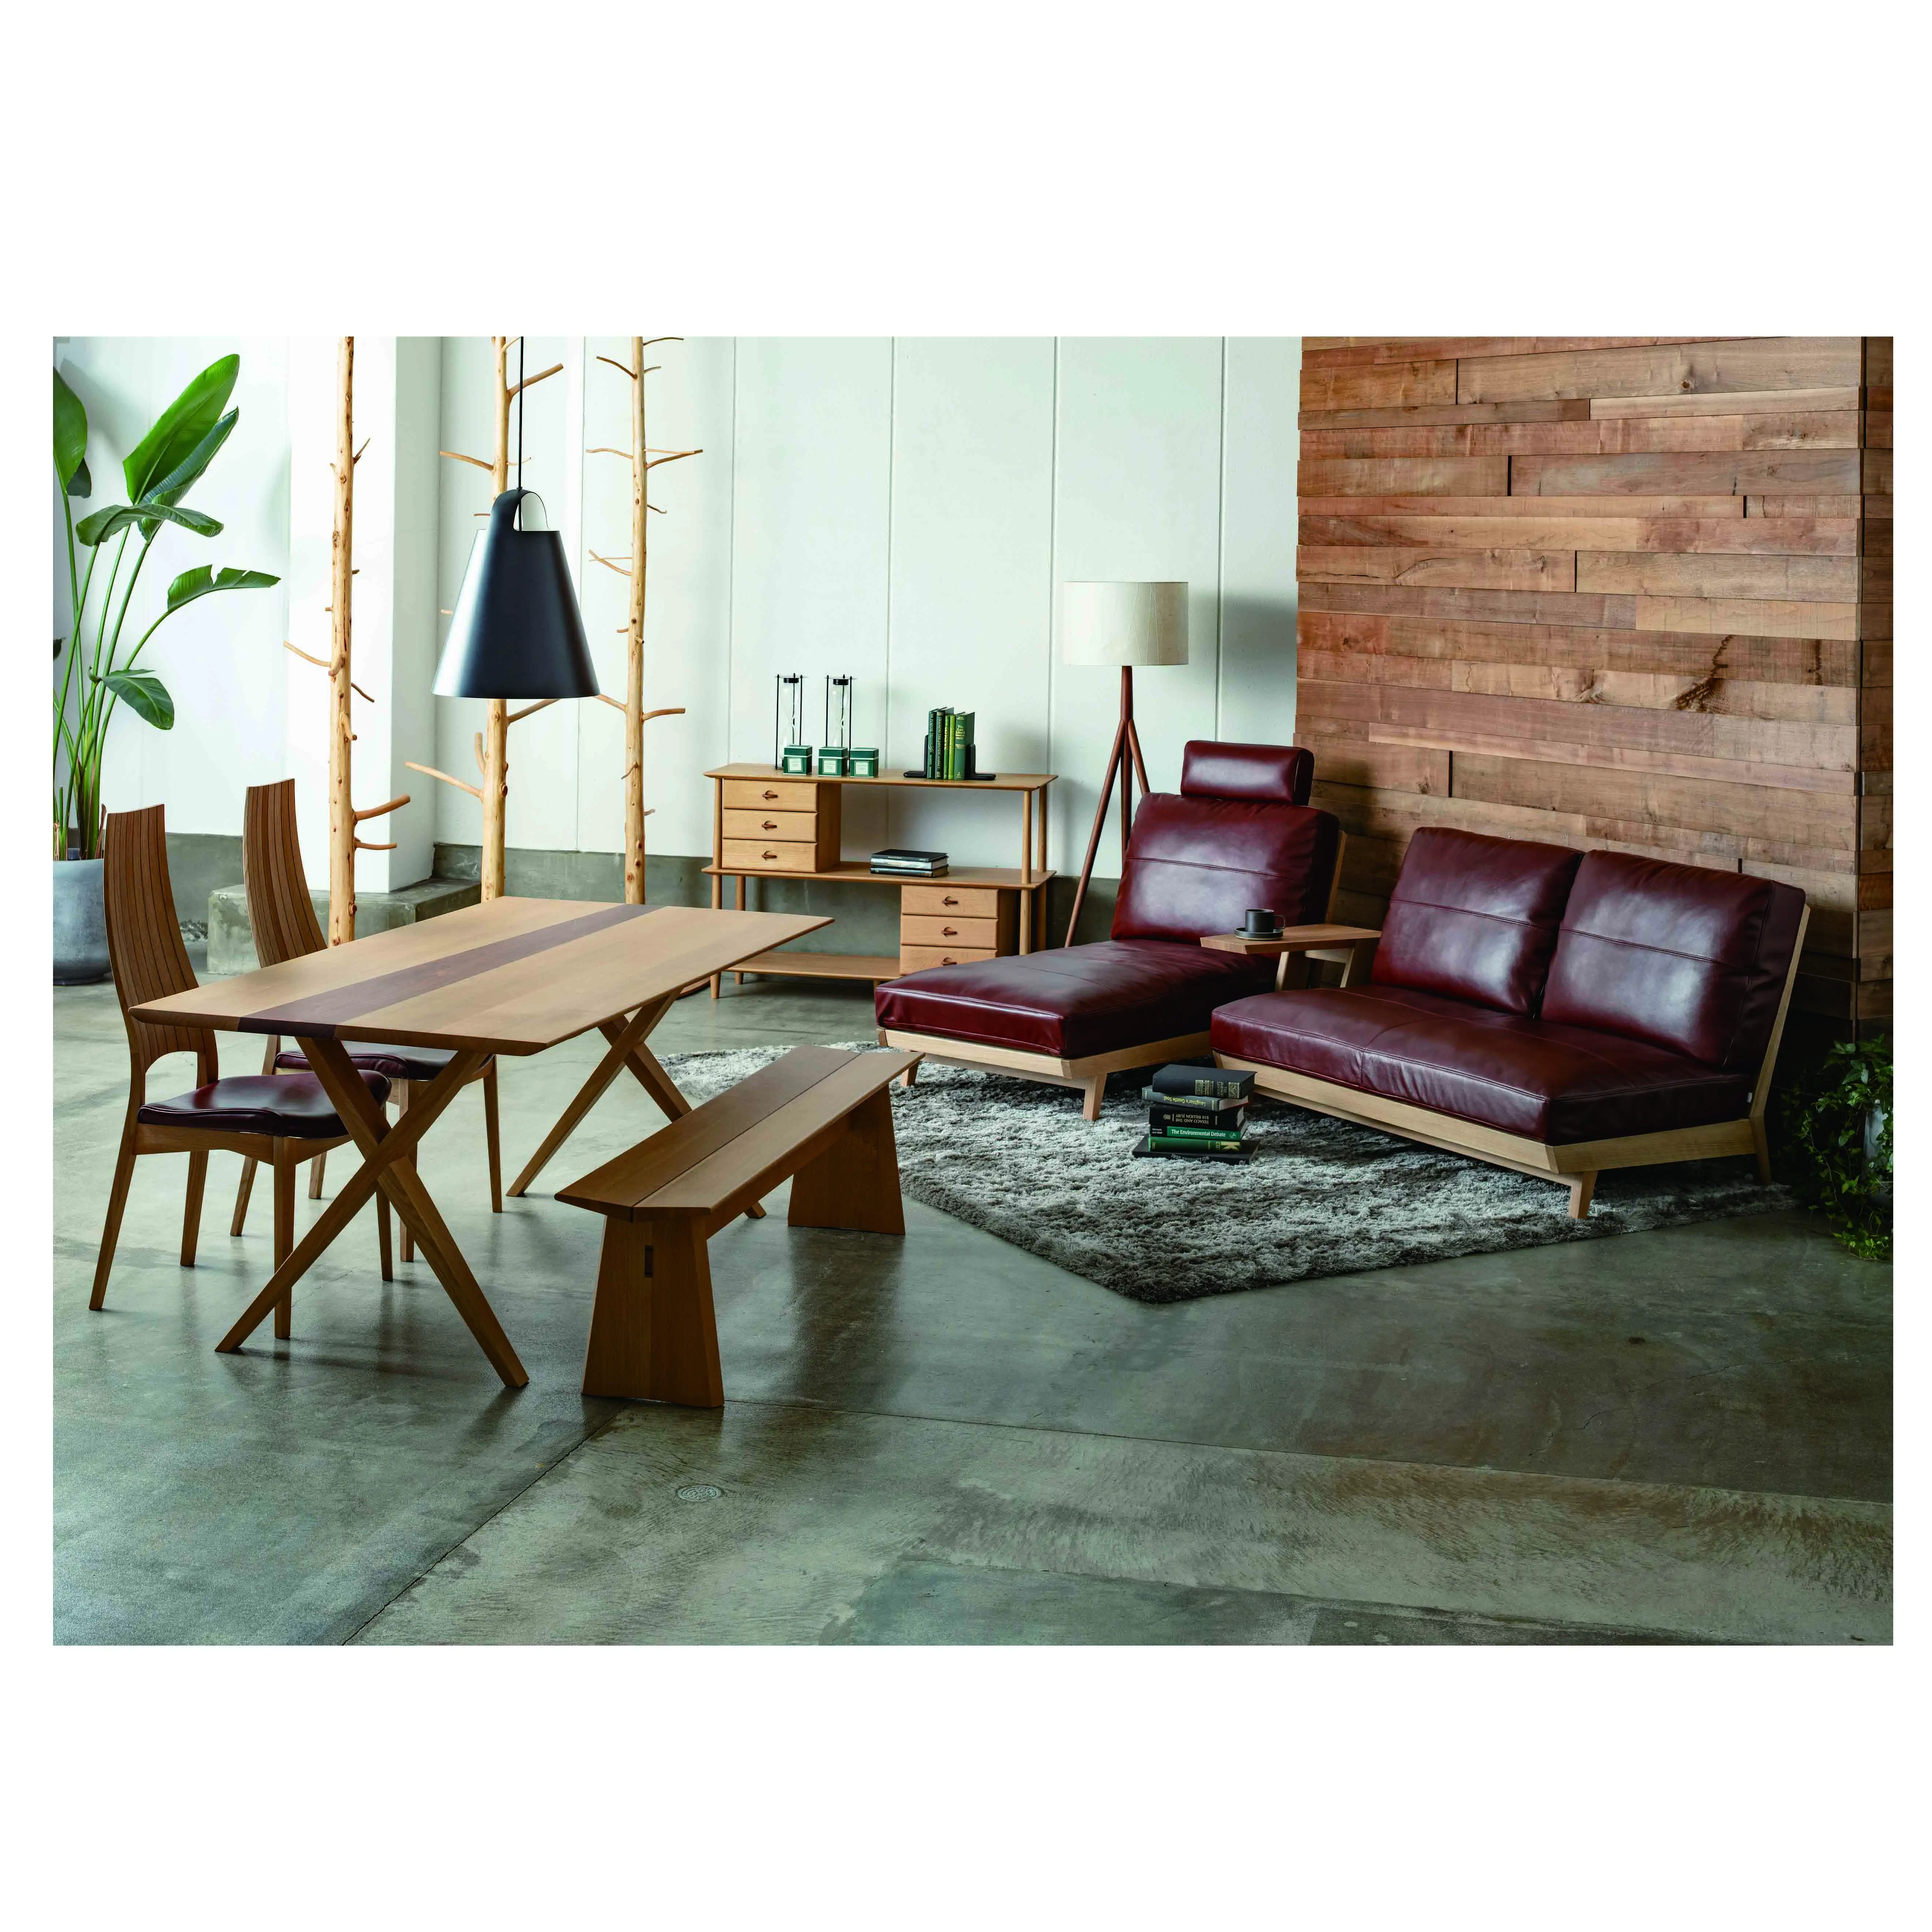 Japanese Customized Homeware Furniture Wood Dining Table Room